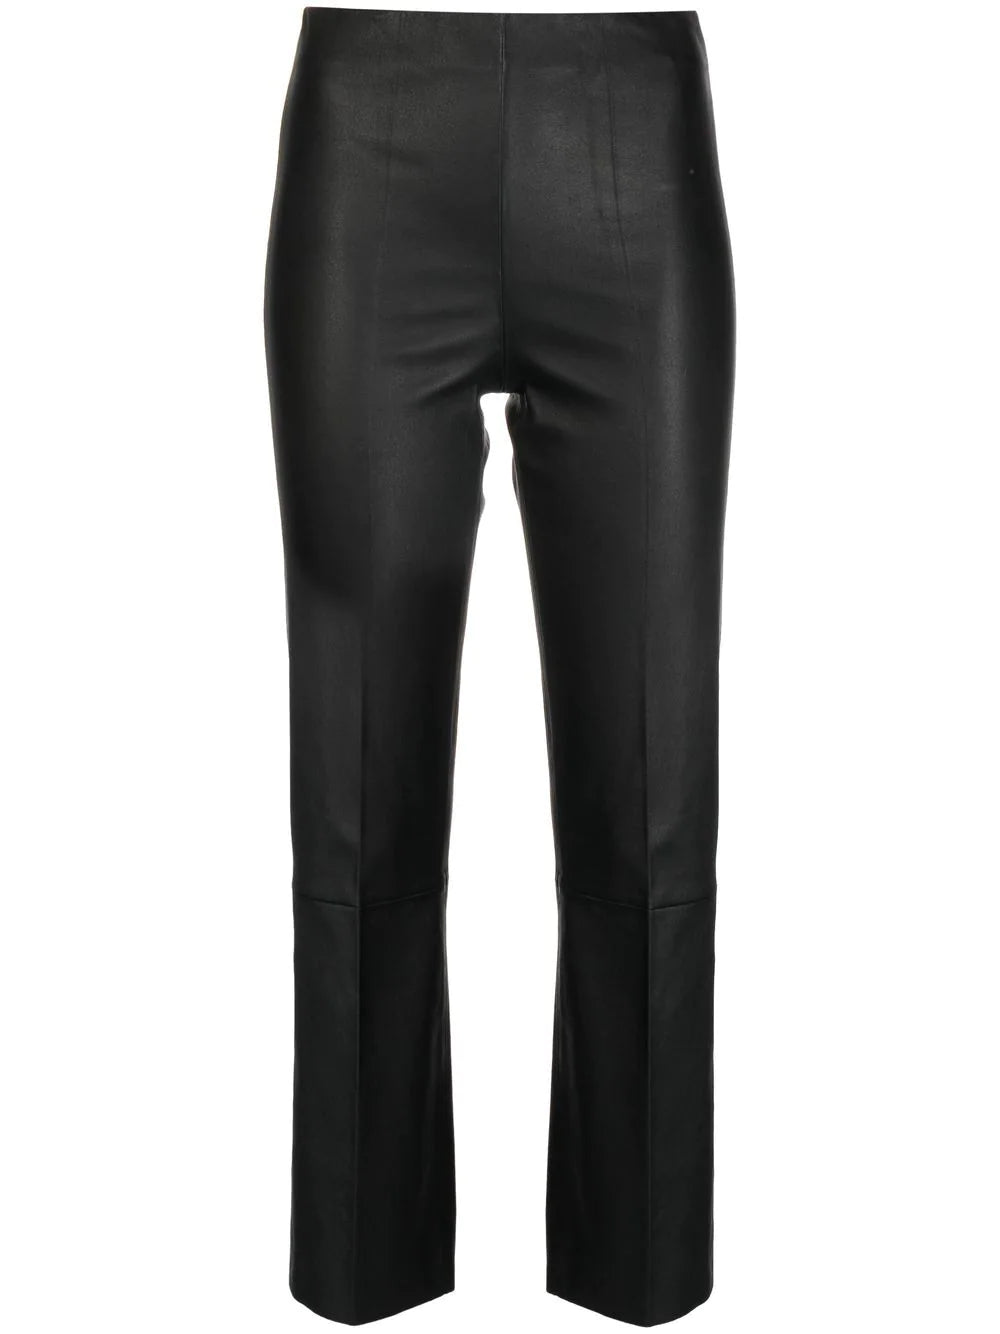 Florentina cropped leather trousers, black